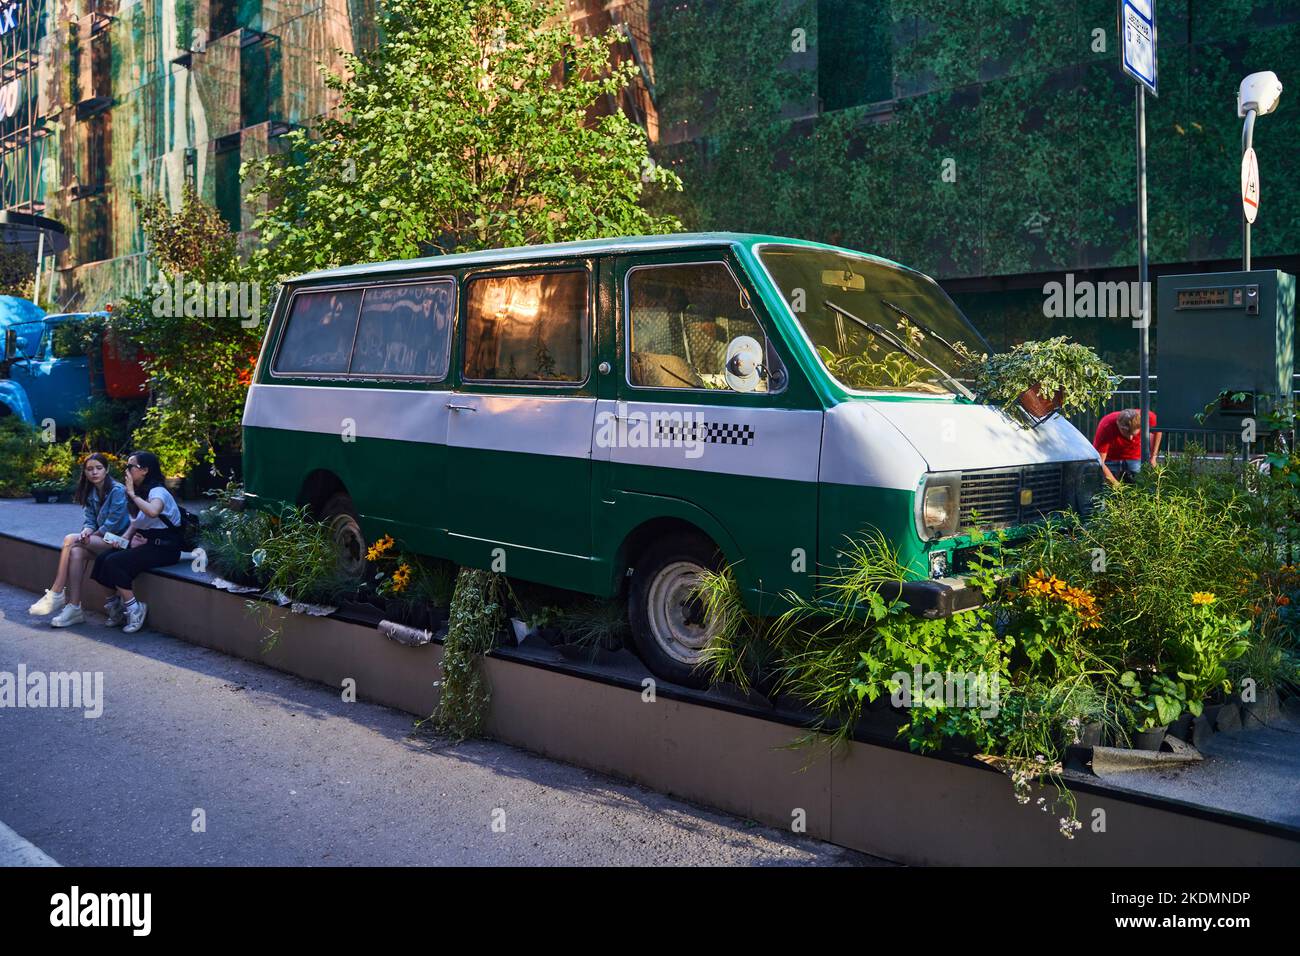 Moscow, Russia - 30.07.2022: An old green and white taxi truck standing among plants and flowers Stock Photo